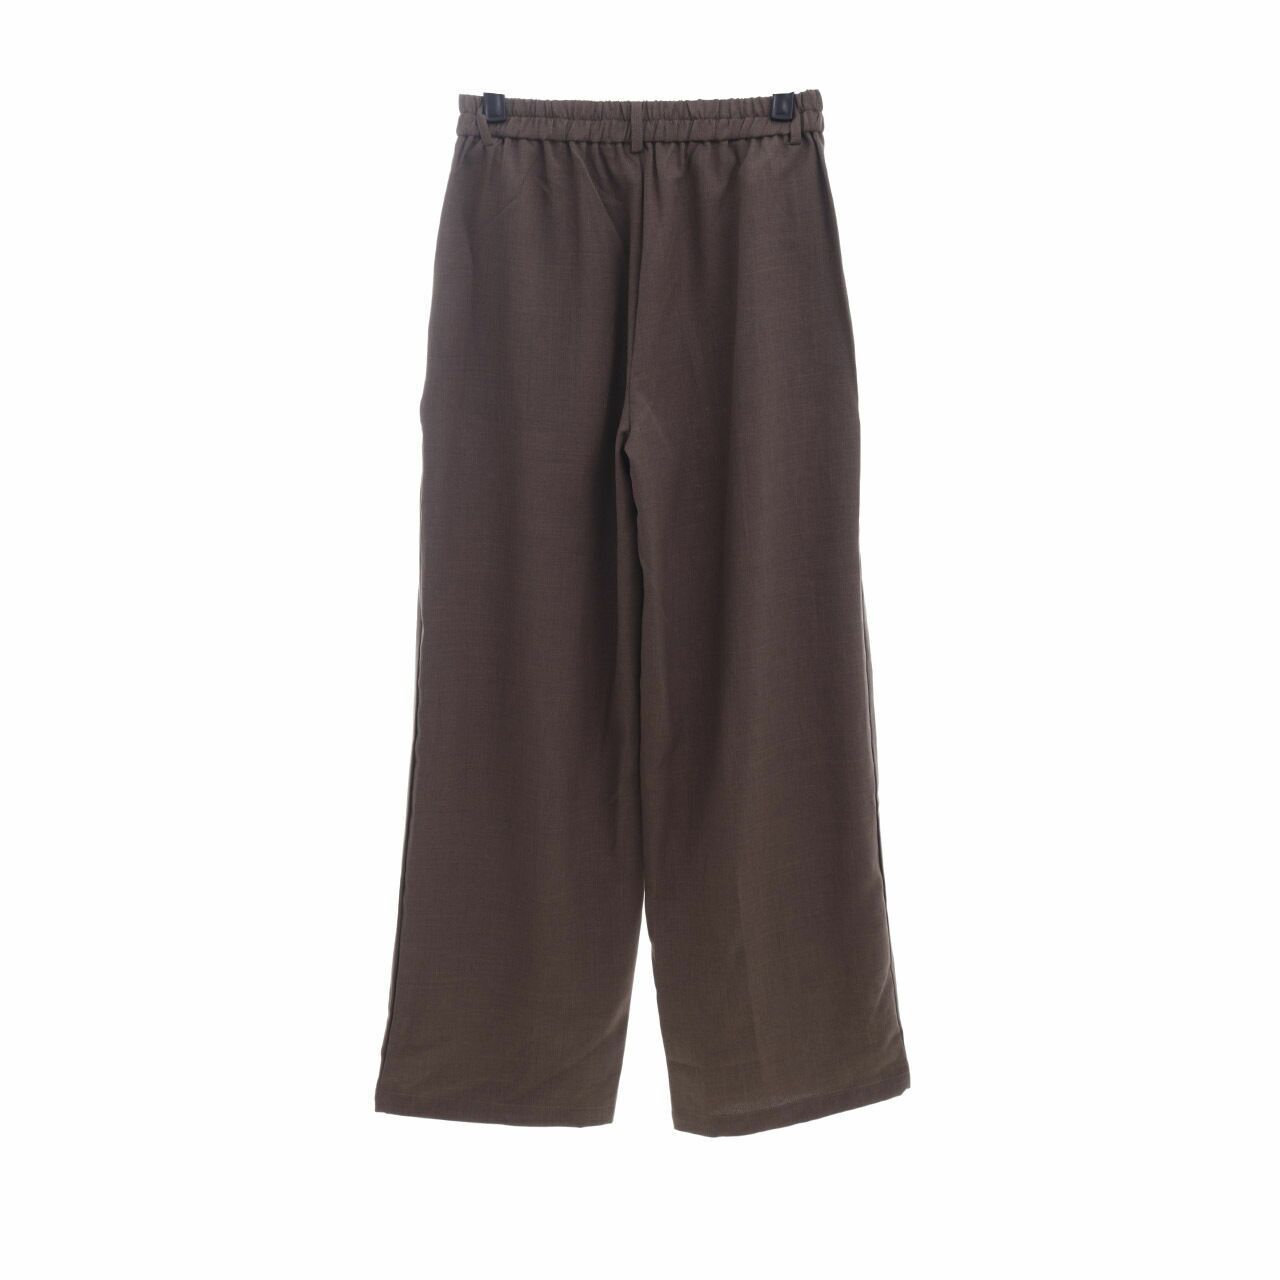 ATS The Label Taupe Long Pants